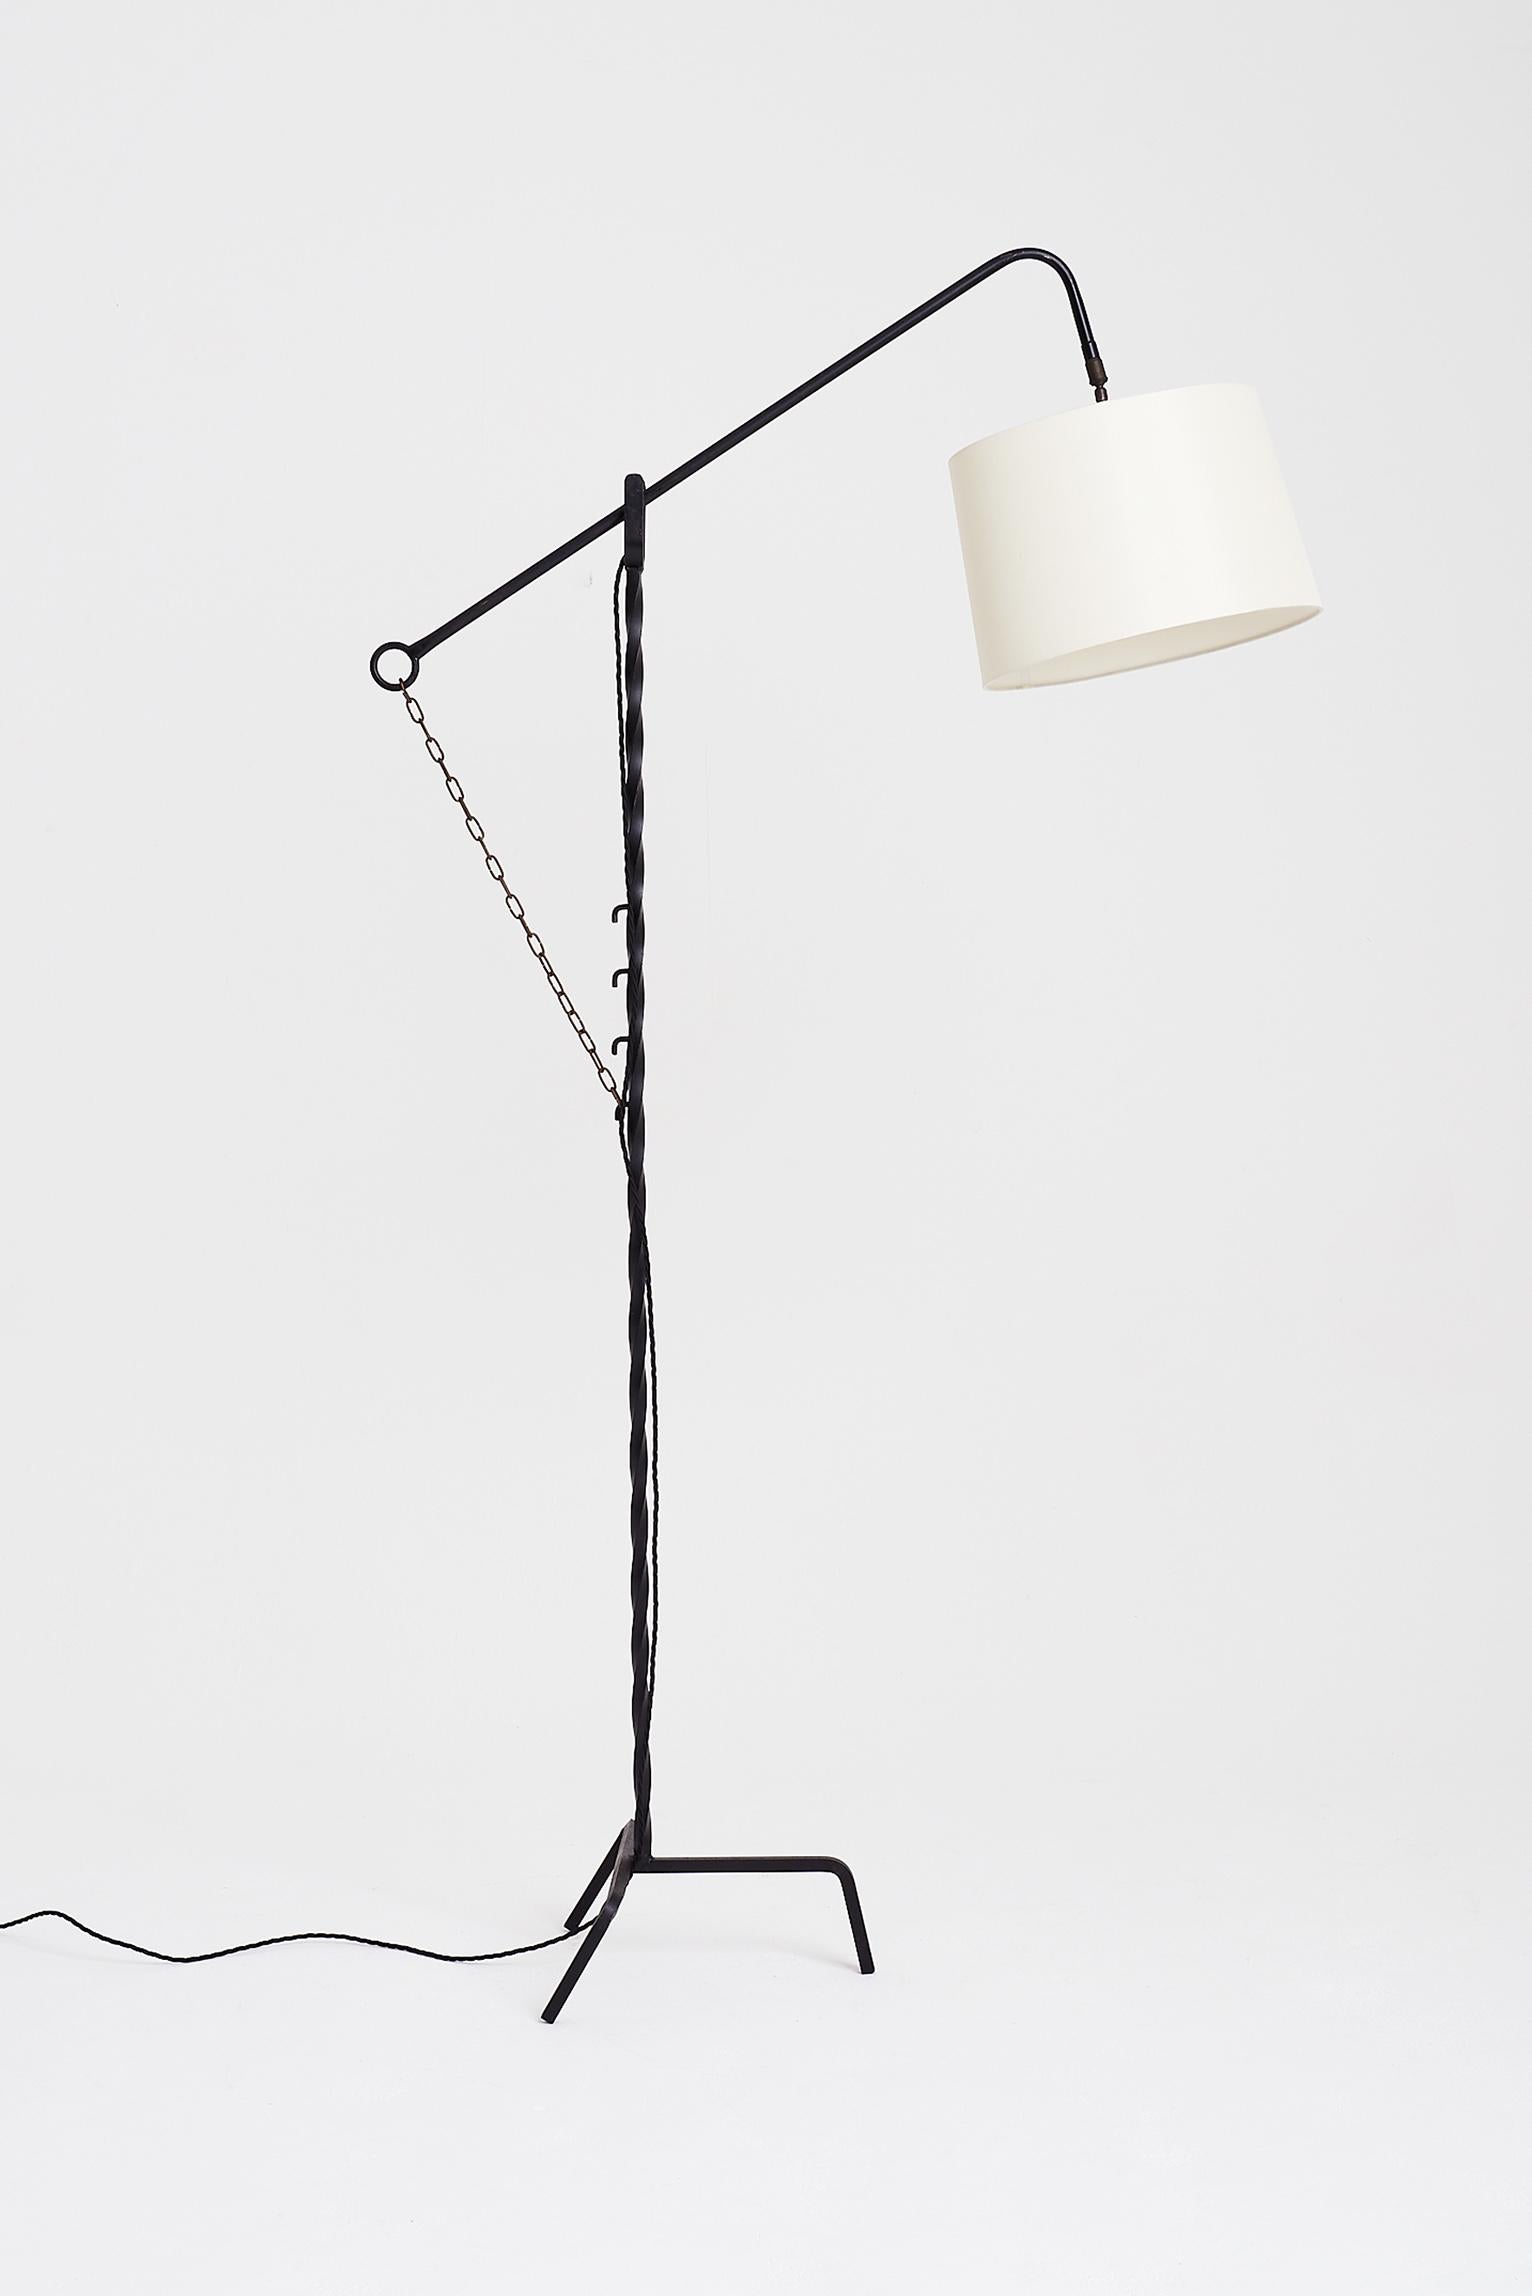 A black wrought iron floor lamp, the twisted stem on a tripod base, holding an adjustable arm hung on a cremaillere system with a brass chain.
France, circa 1950.